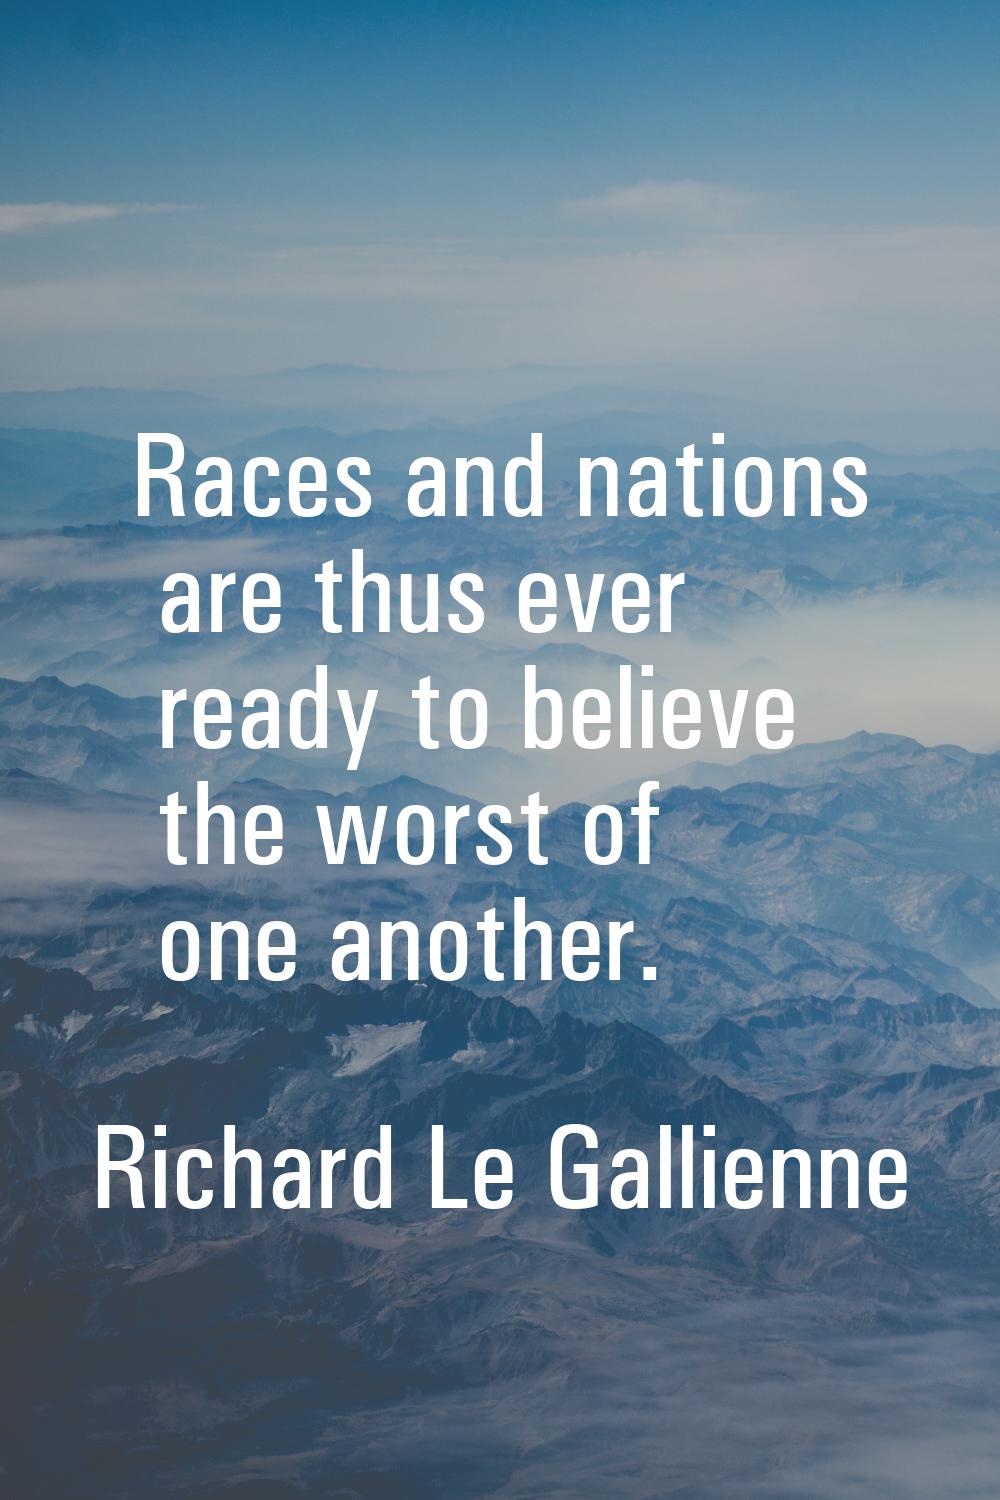 Races and nations are thus ever ready to believe the worst of one another.